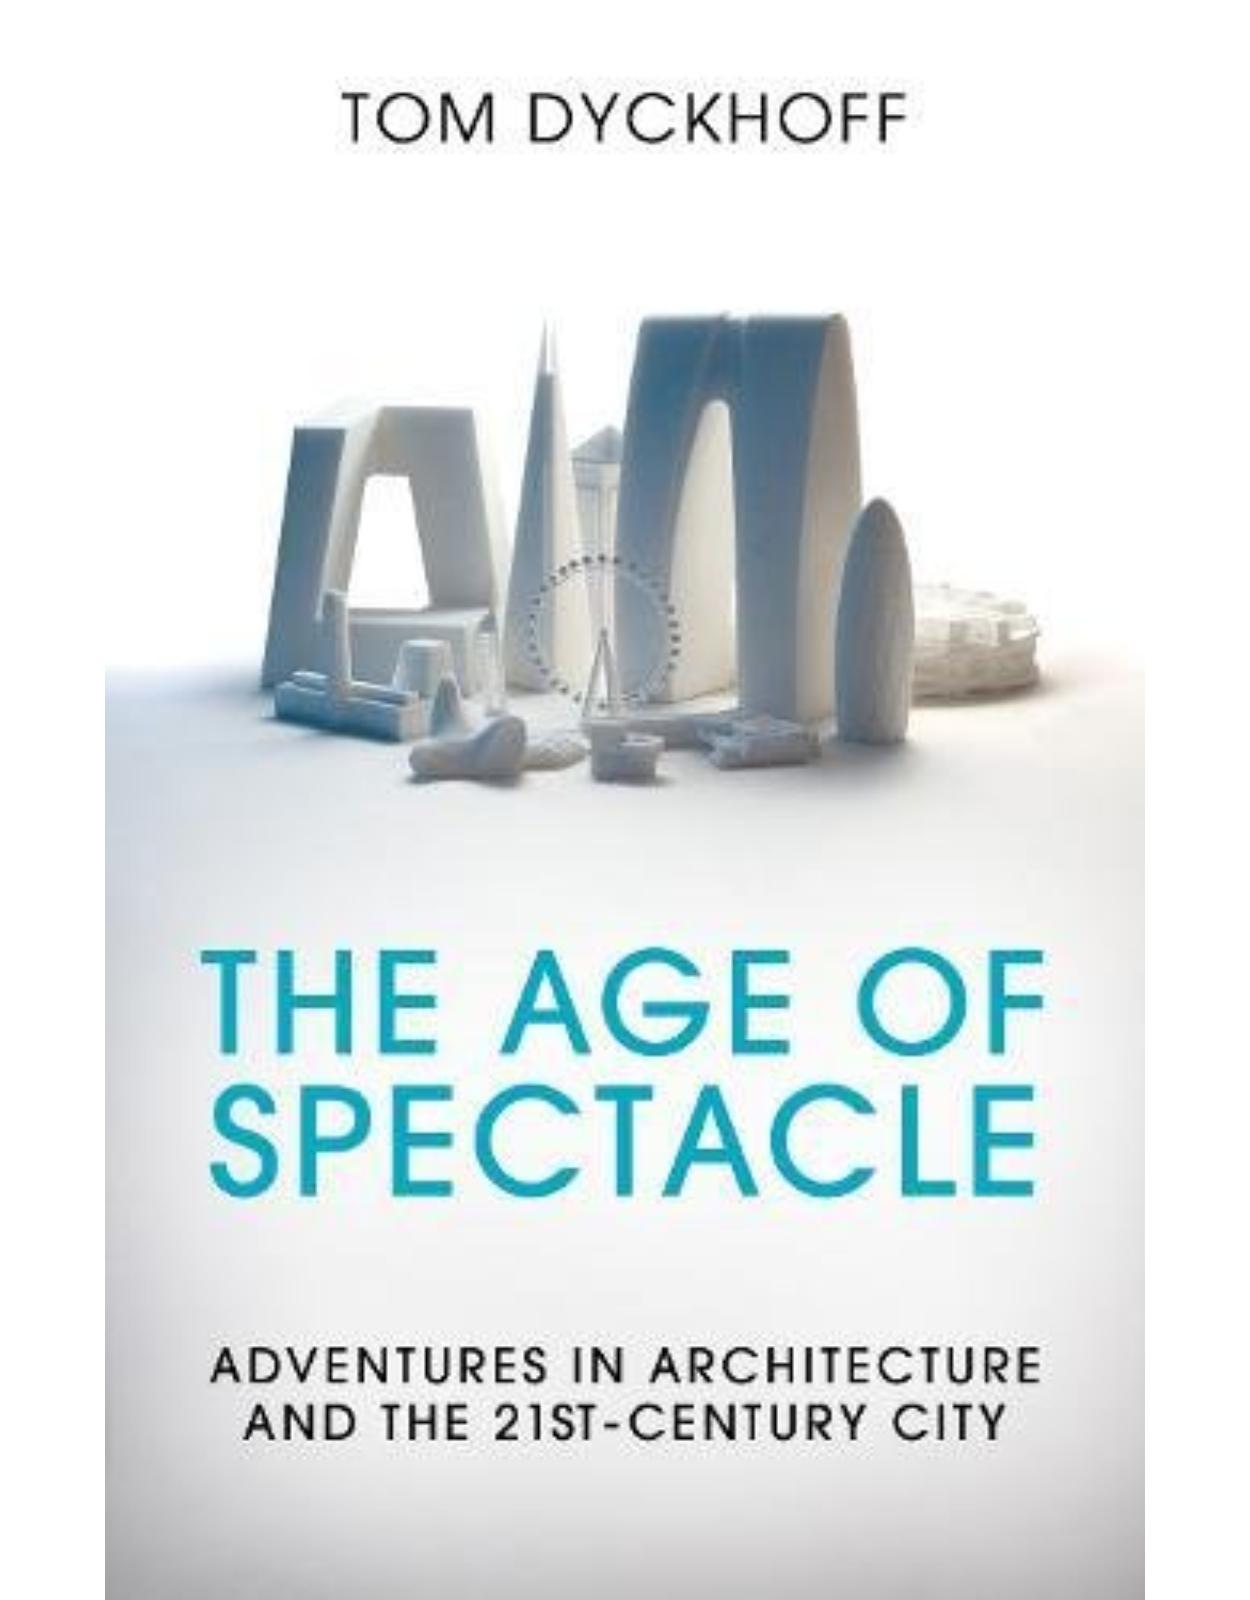 The Age of Spectacle: Adventures in Architecture and the 21st-Century City